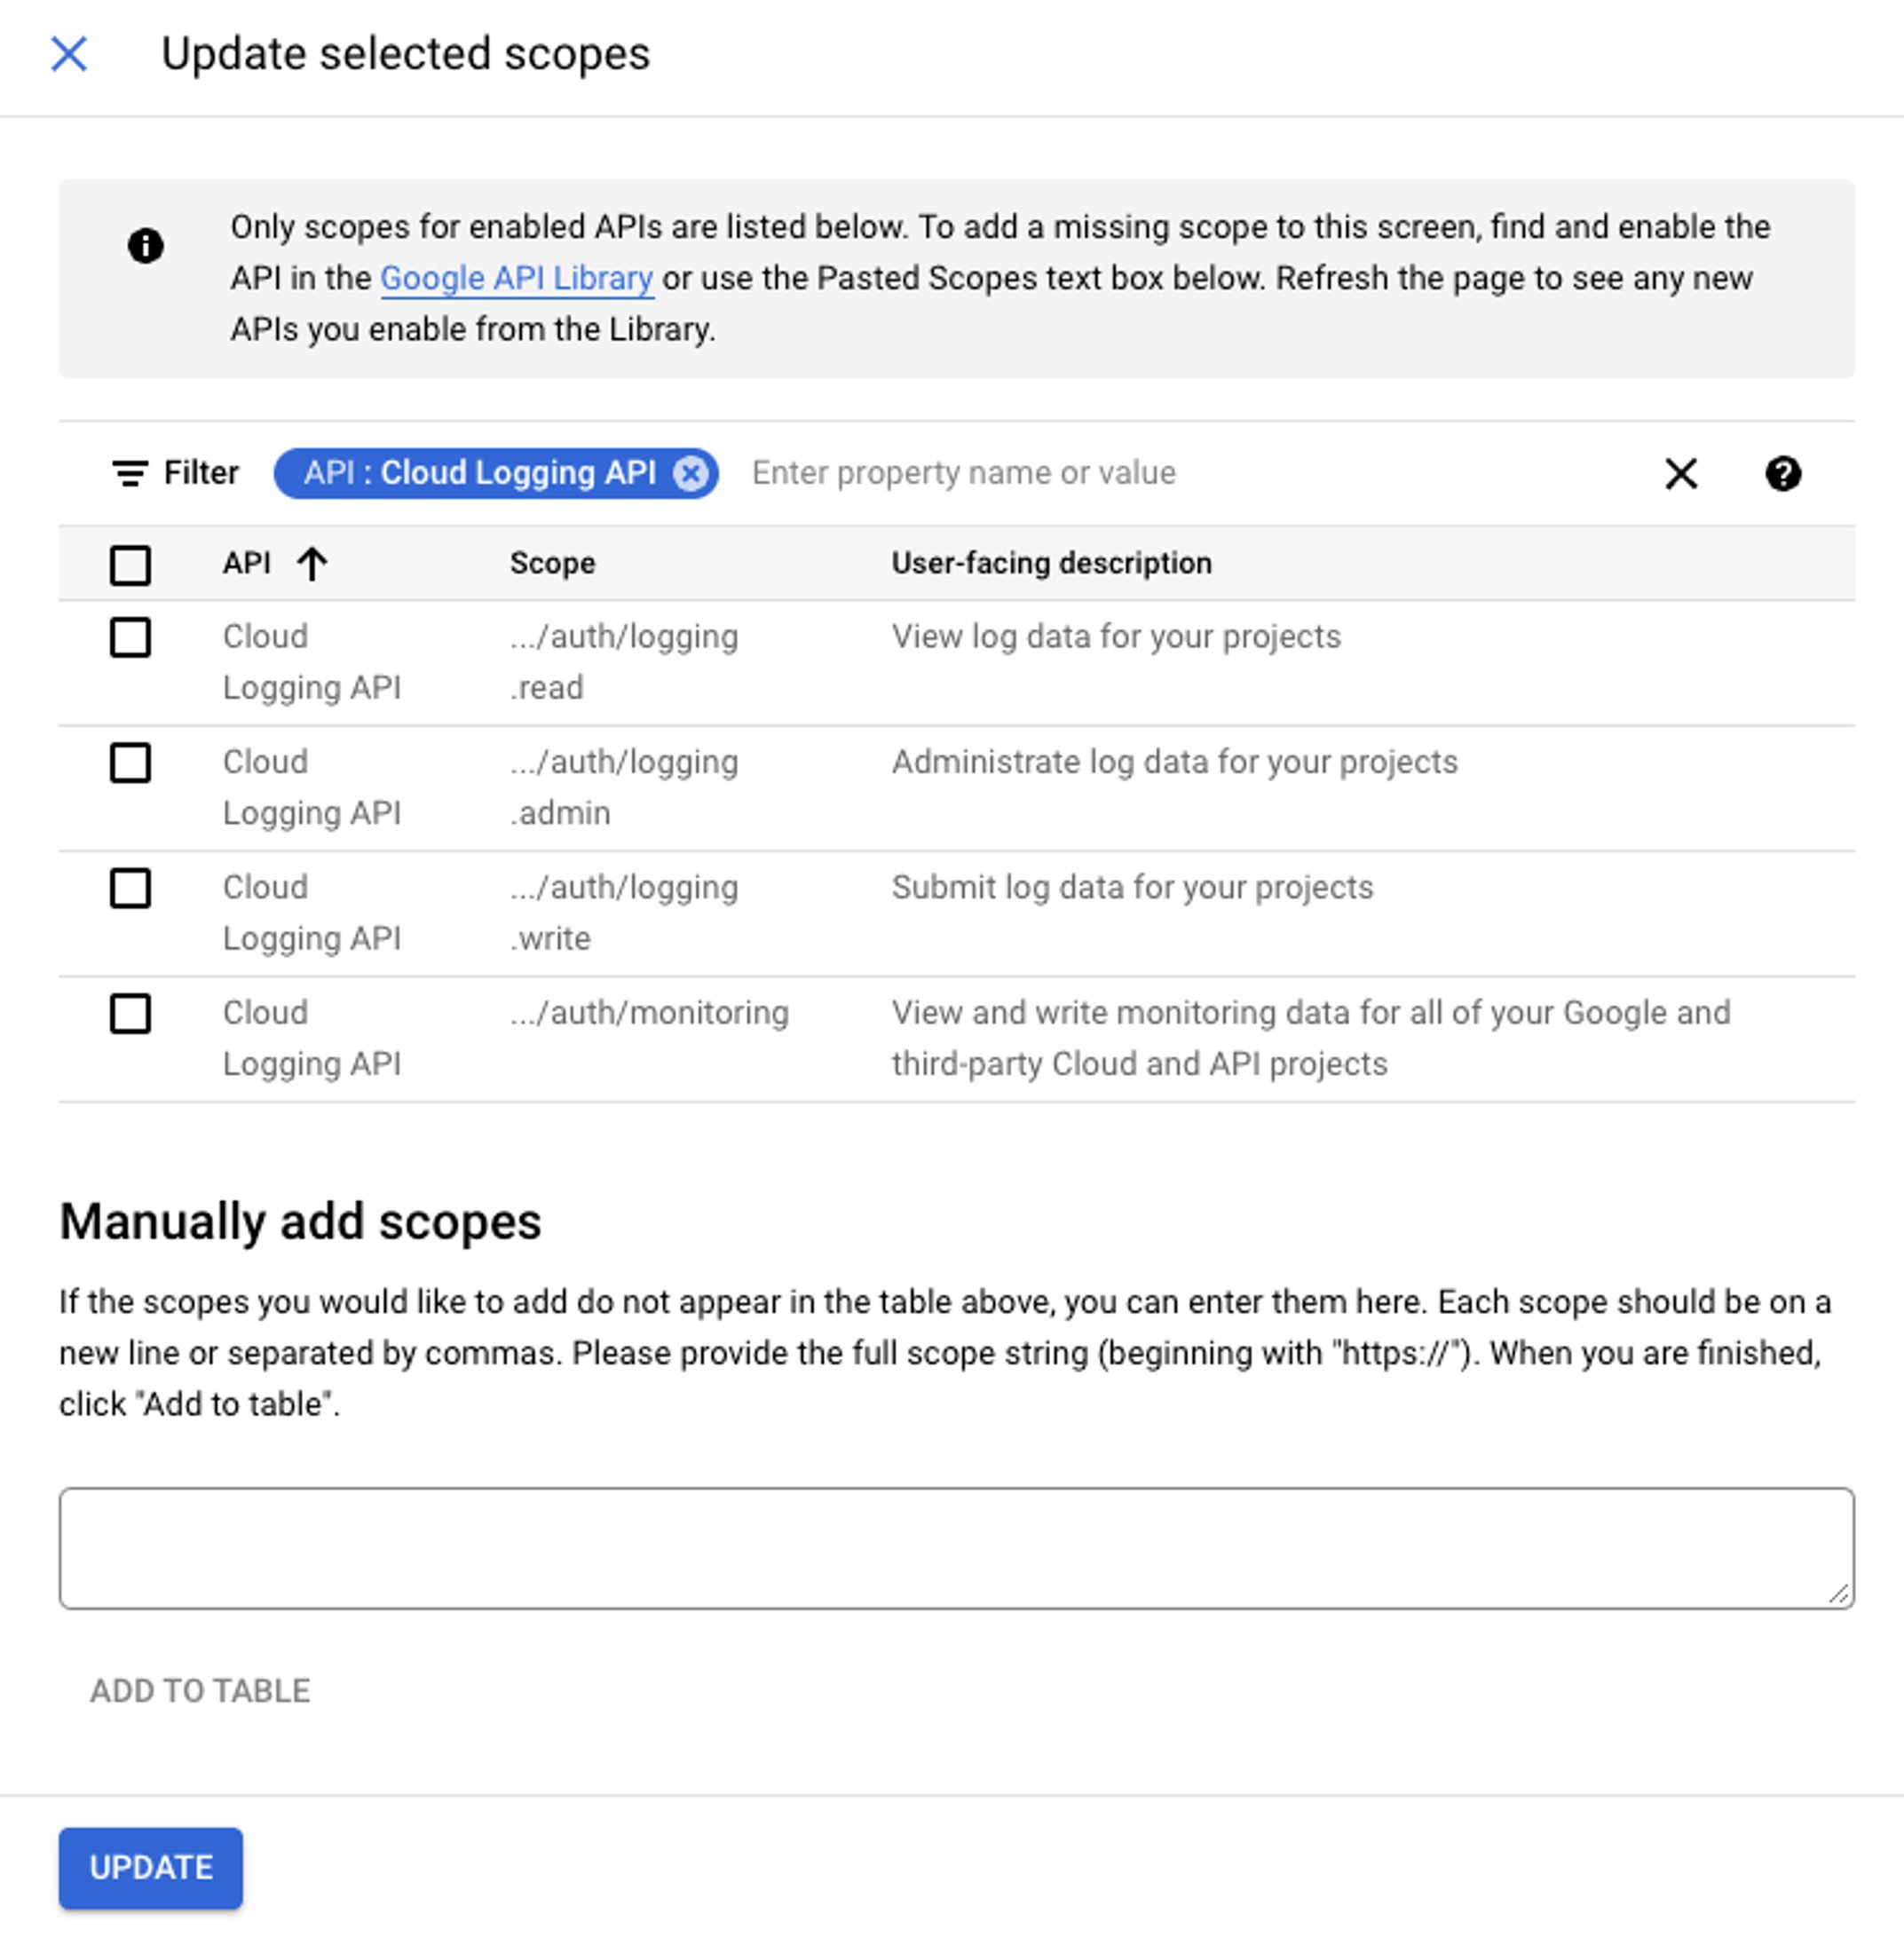 Updating scopes in Google Cloud